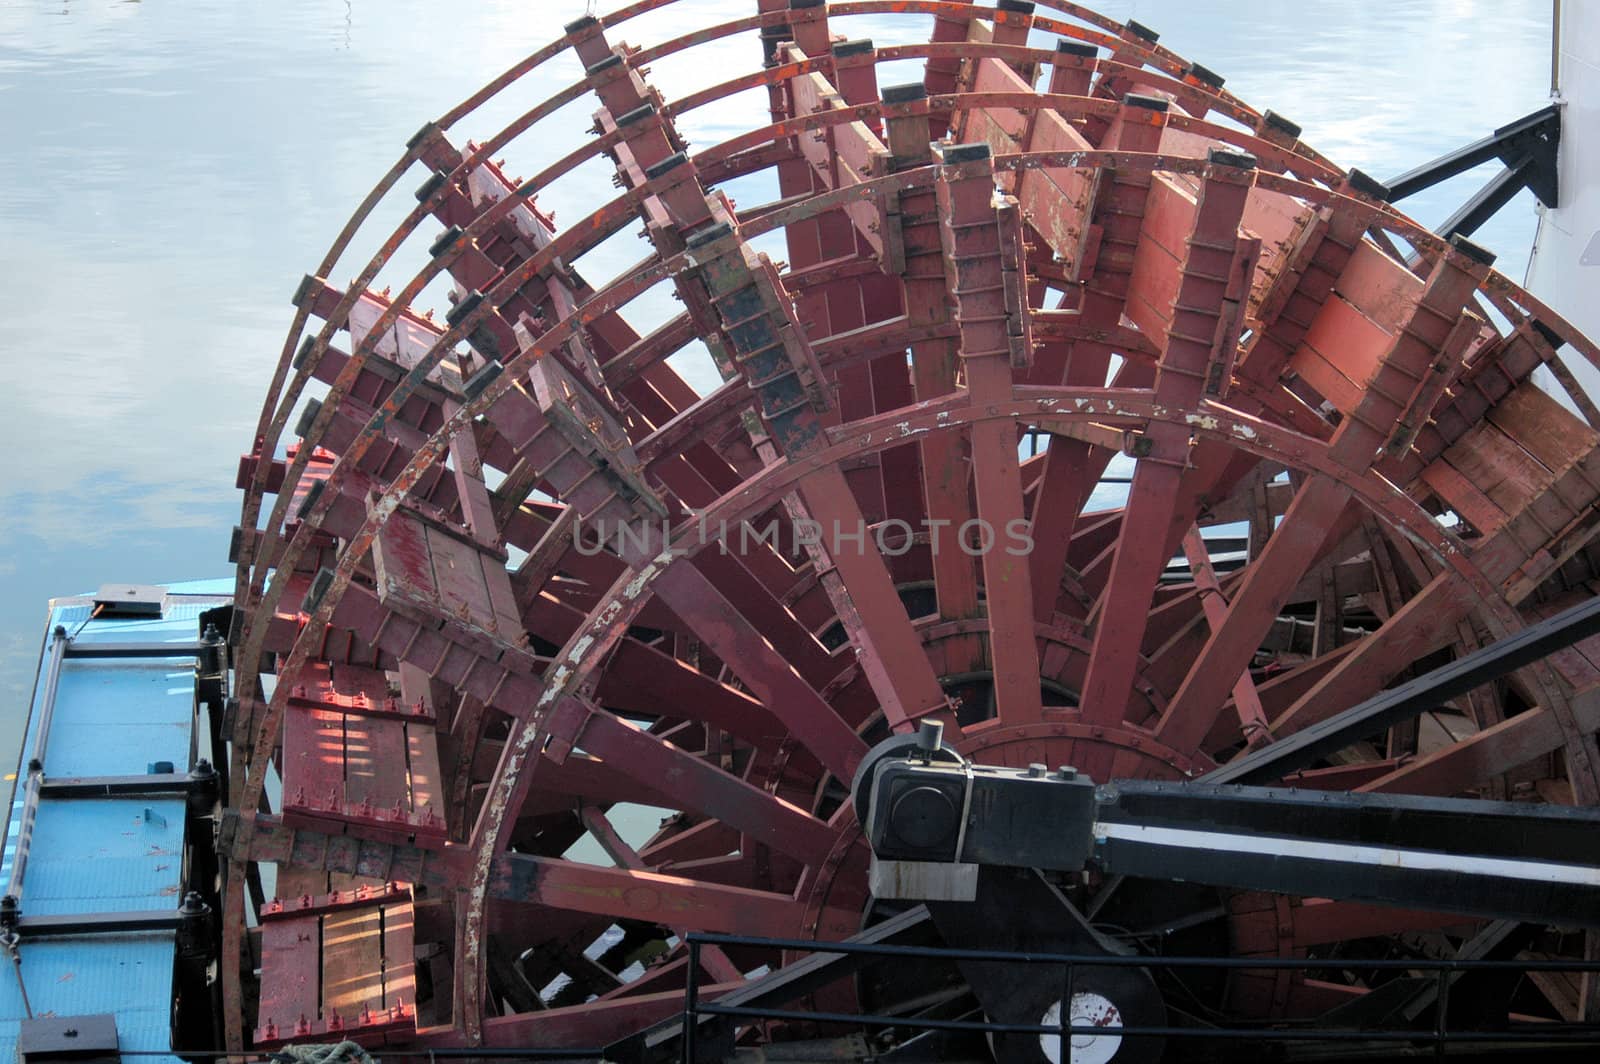 a large paddle wheel on river boat in Georgia